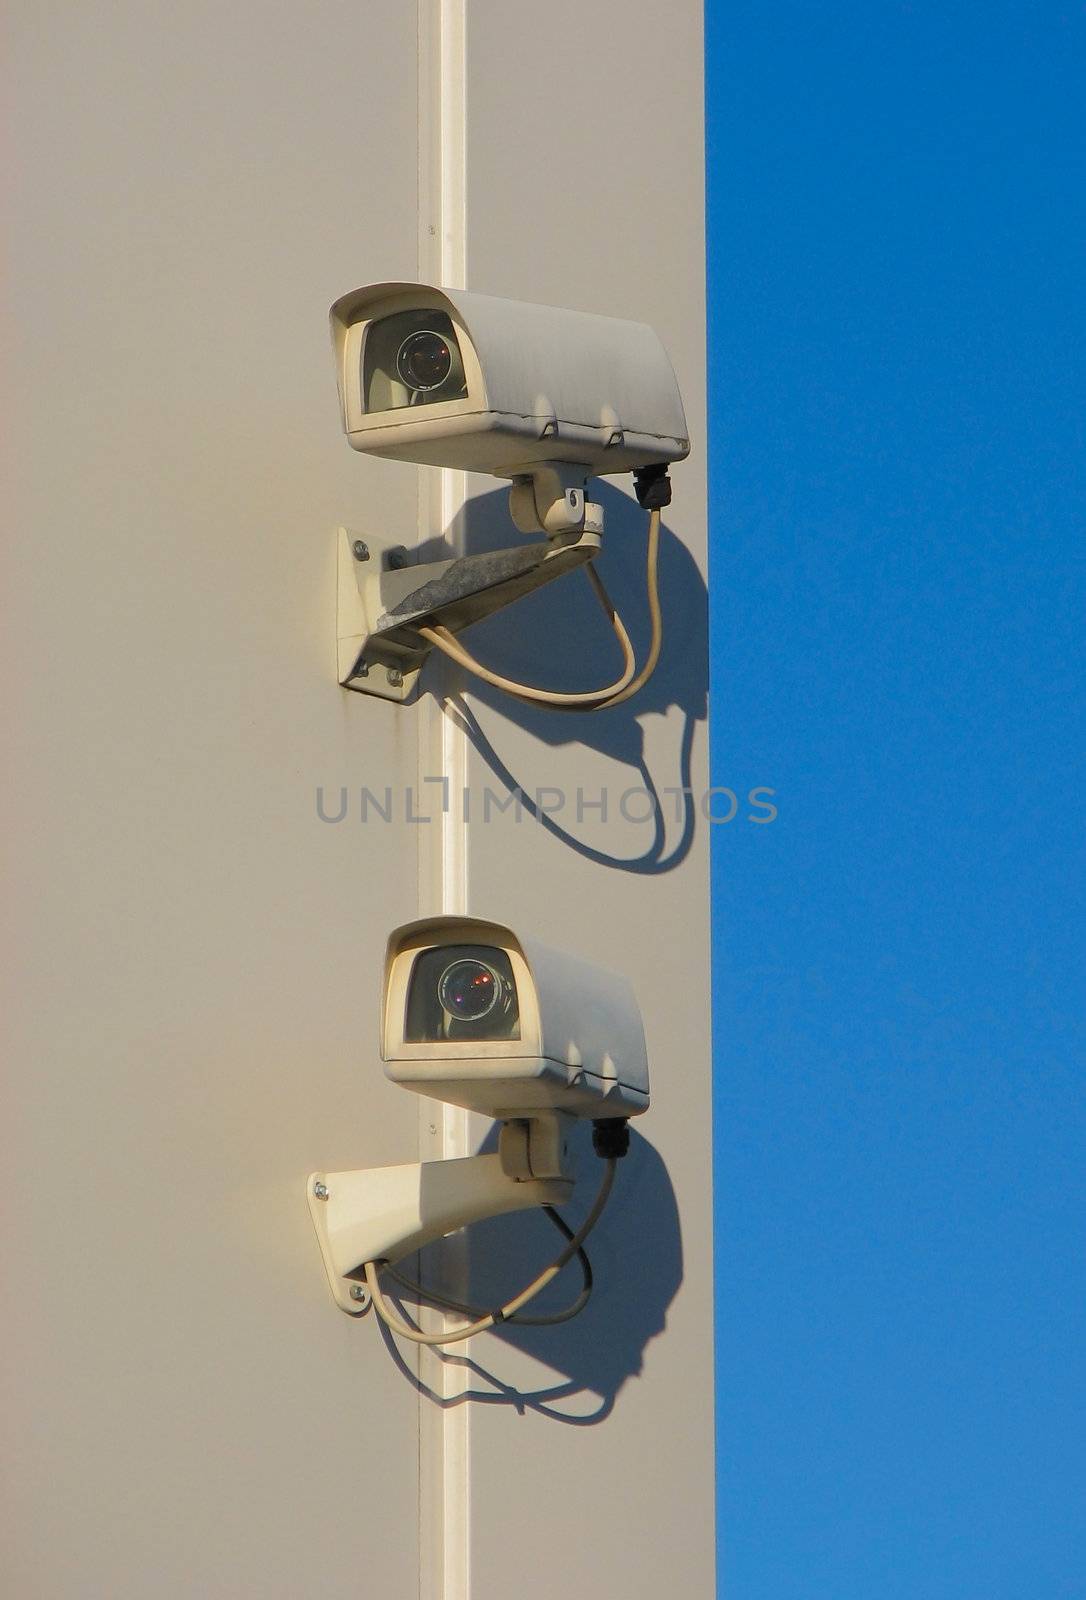 Two security cameras mounted on wall